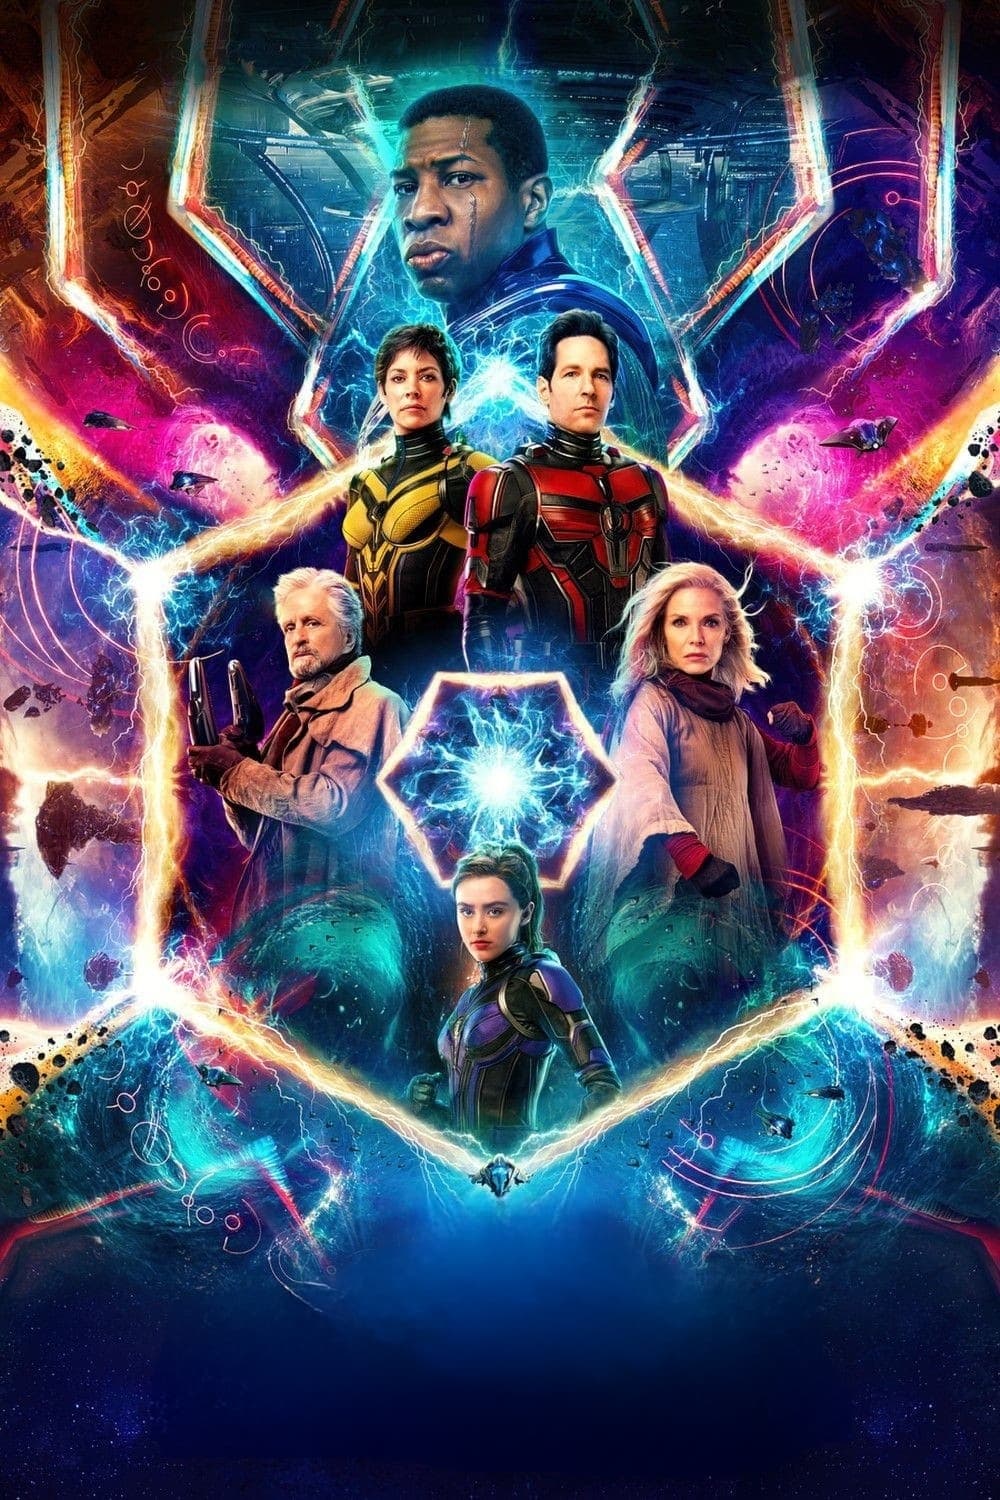 Ant-Man and the Wasp: Quantumania POSTER